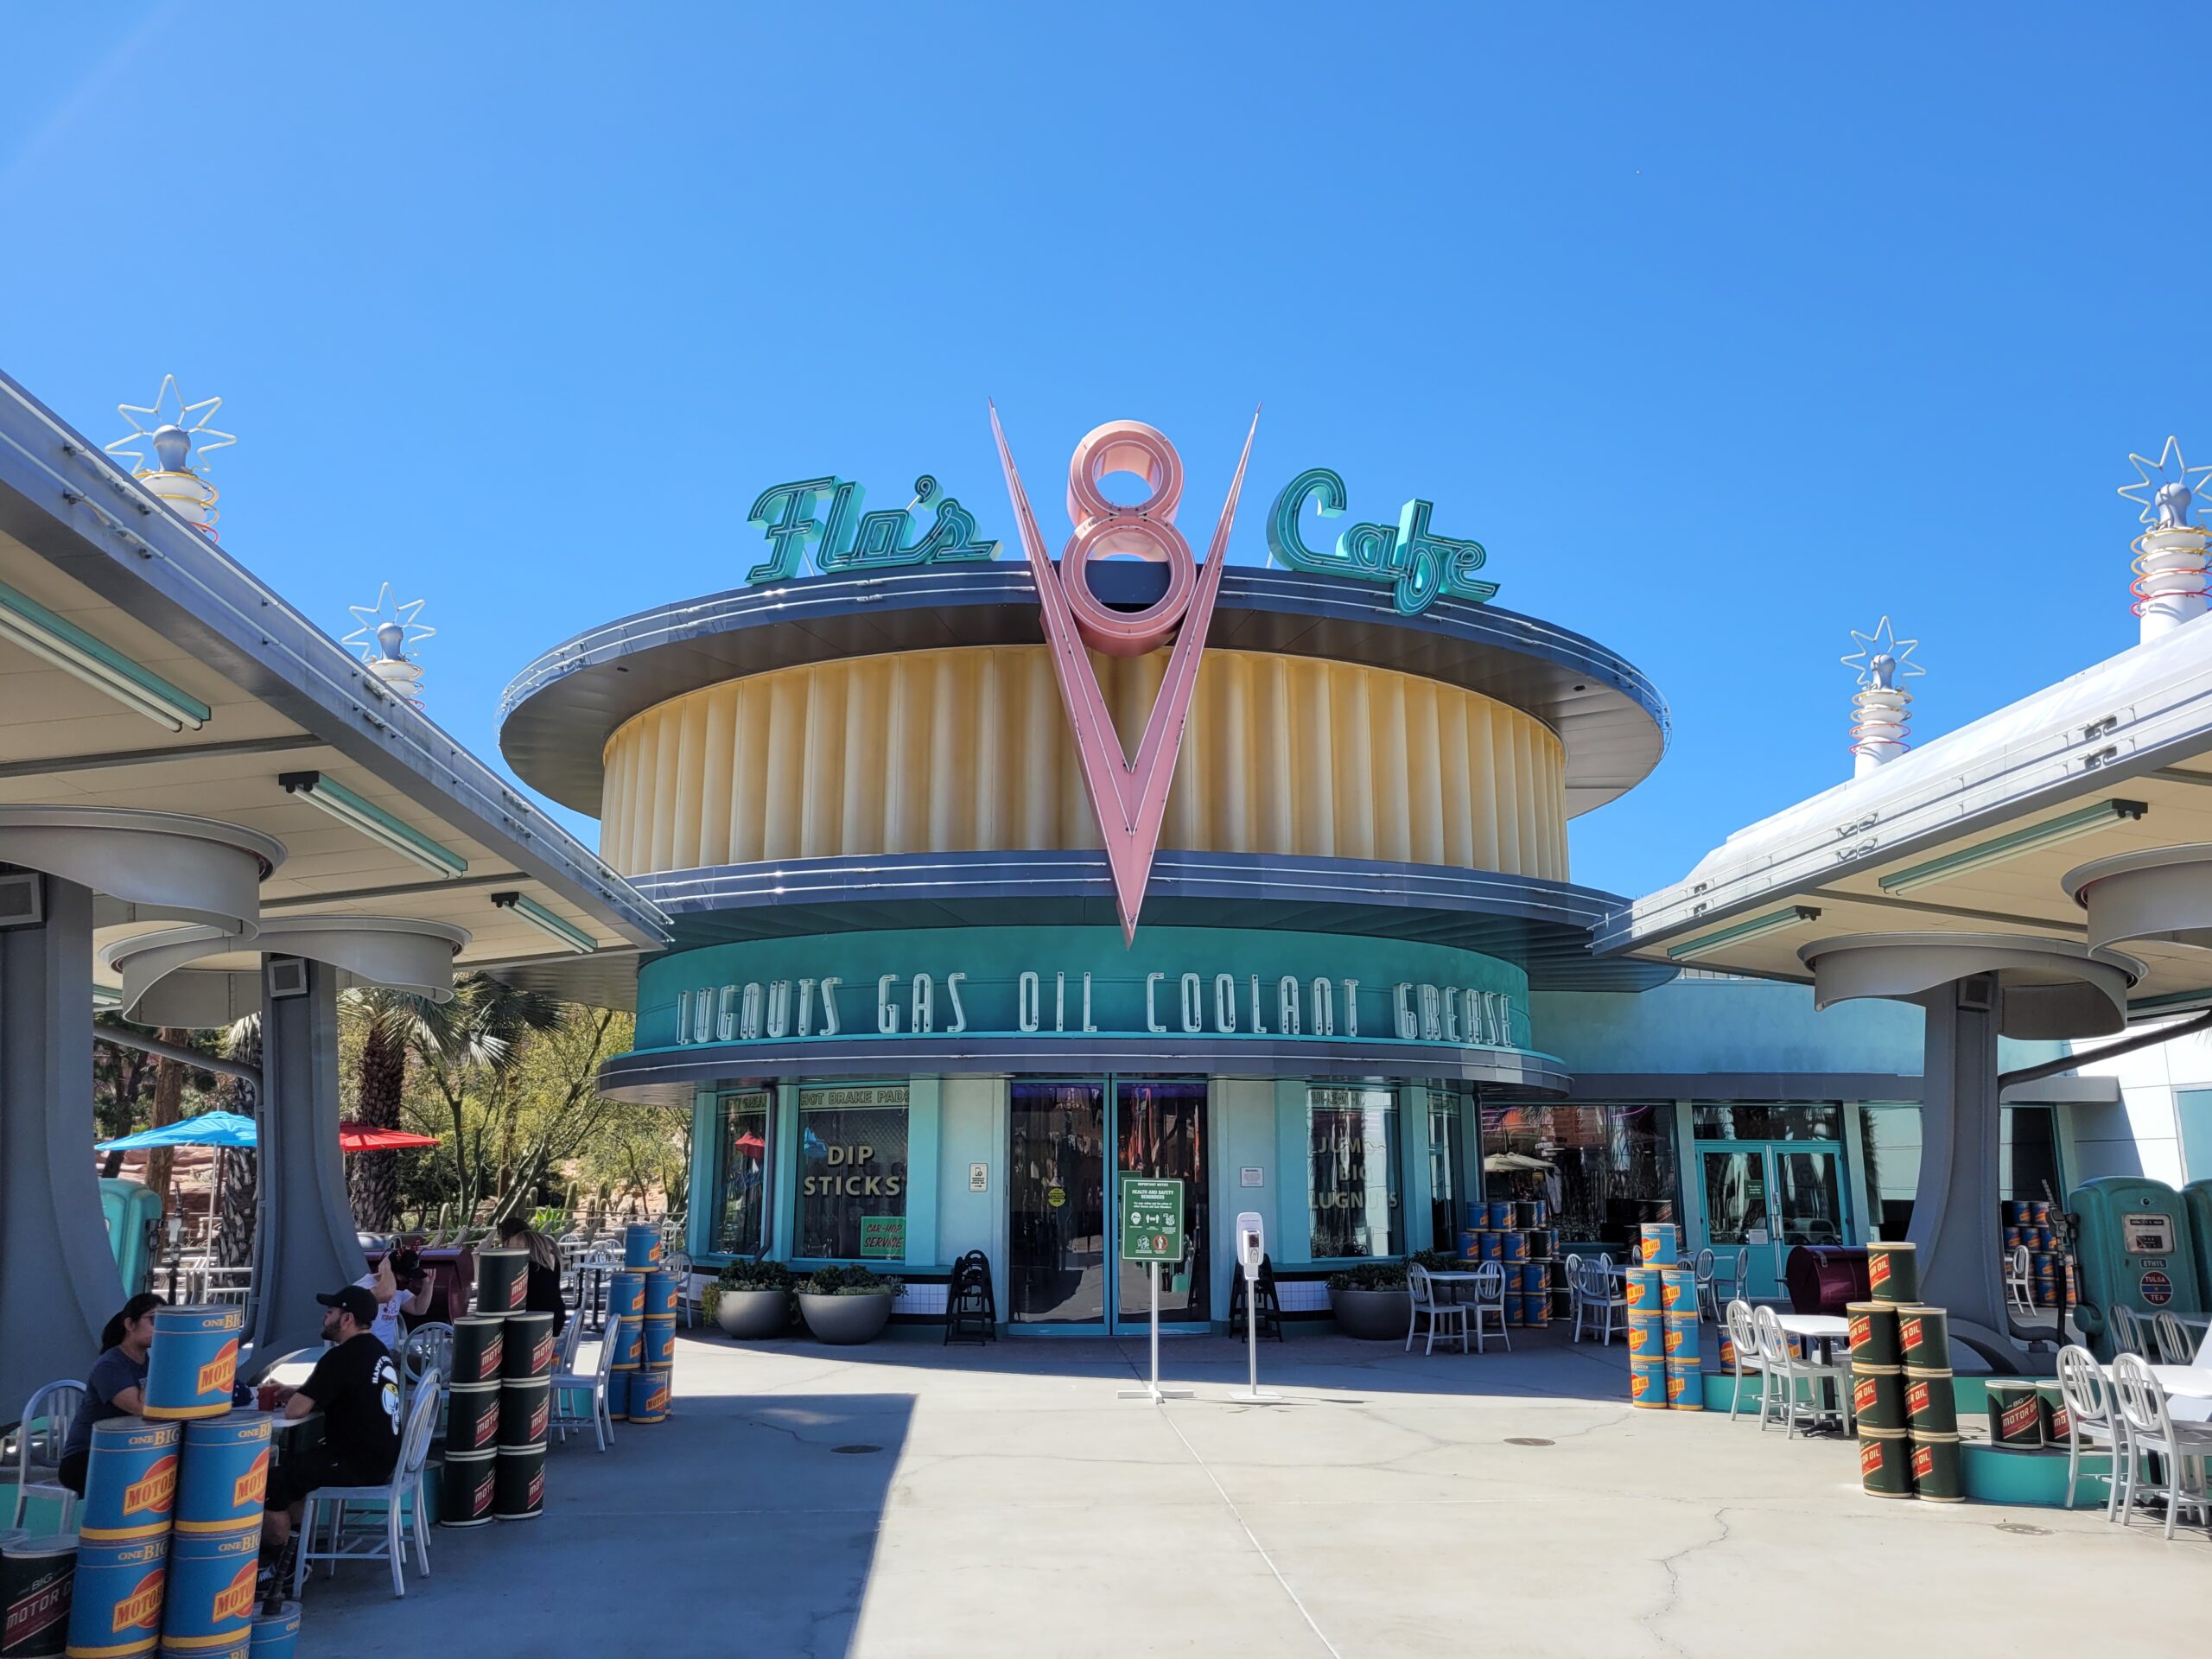 Flo's V8 Cafe in Cars Land at California Adventure